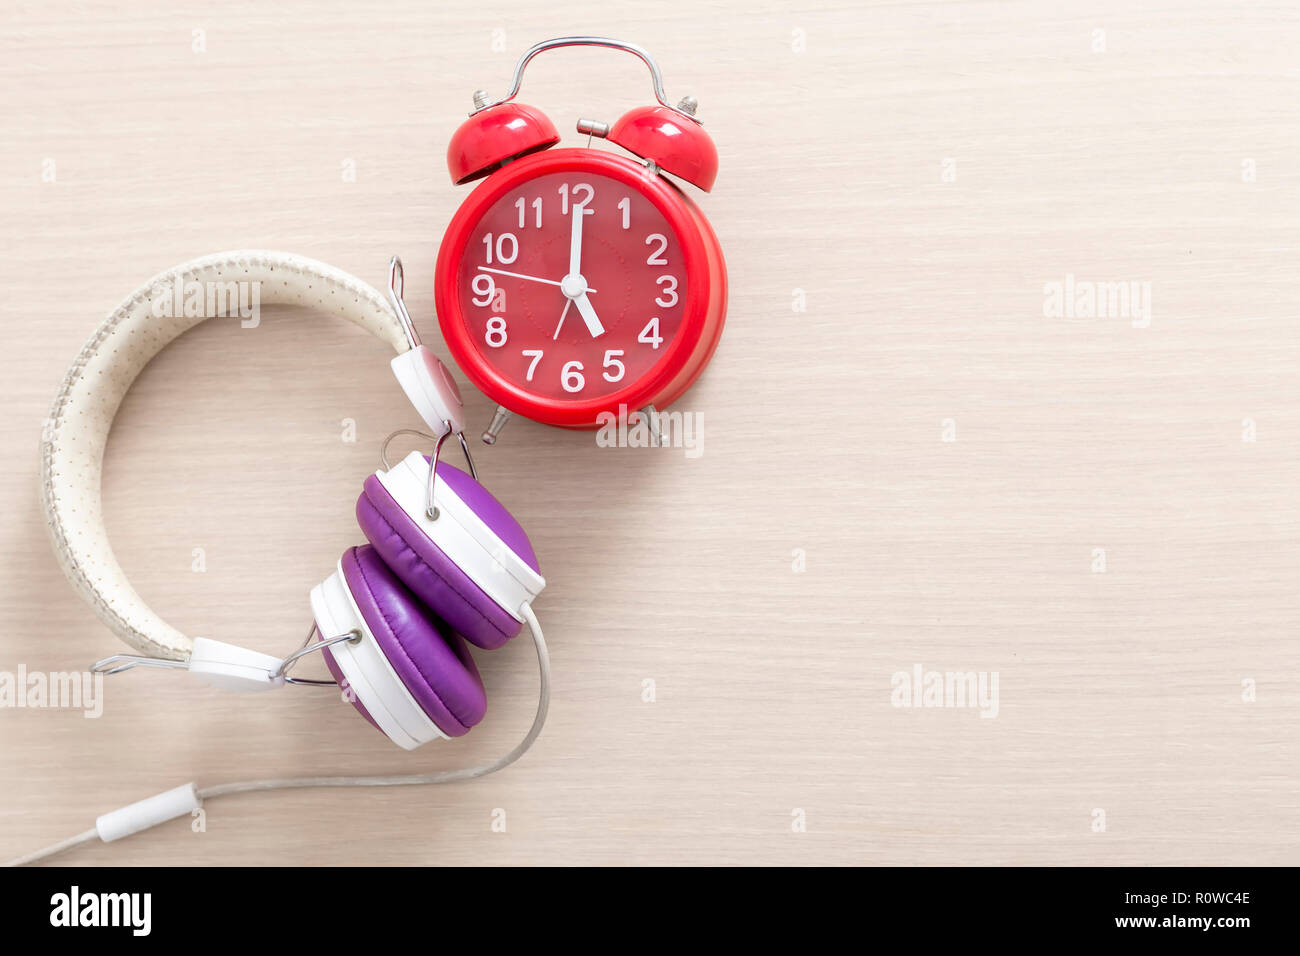 Red alarm clock and headphone on wood table with free copy space for text. Education and music concept. Stock Photo